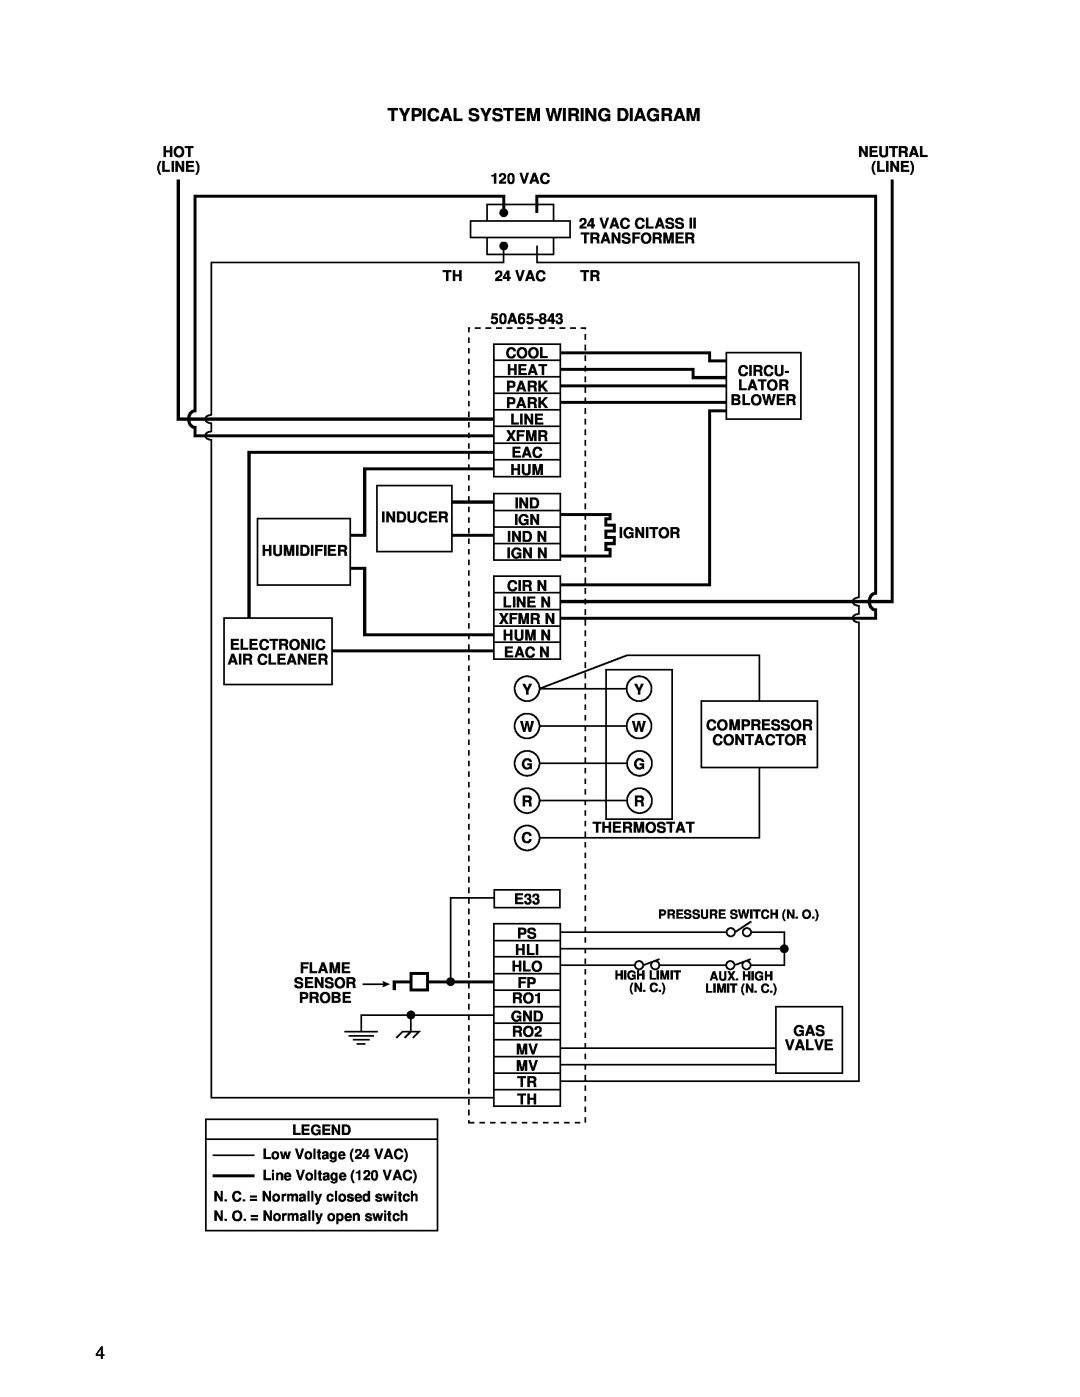 White Rodgers 50A65-843 installation instructions Typical System Wiring Diagram 